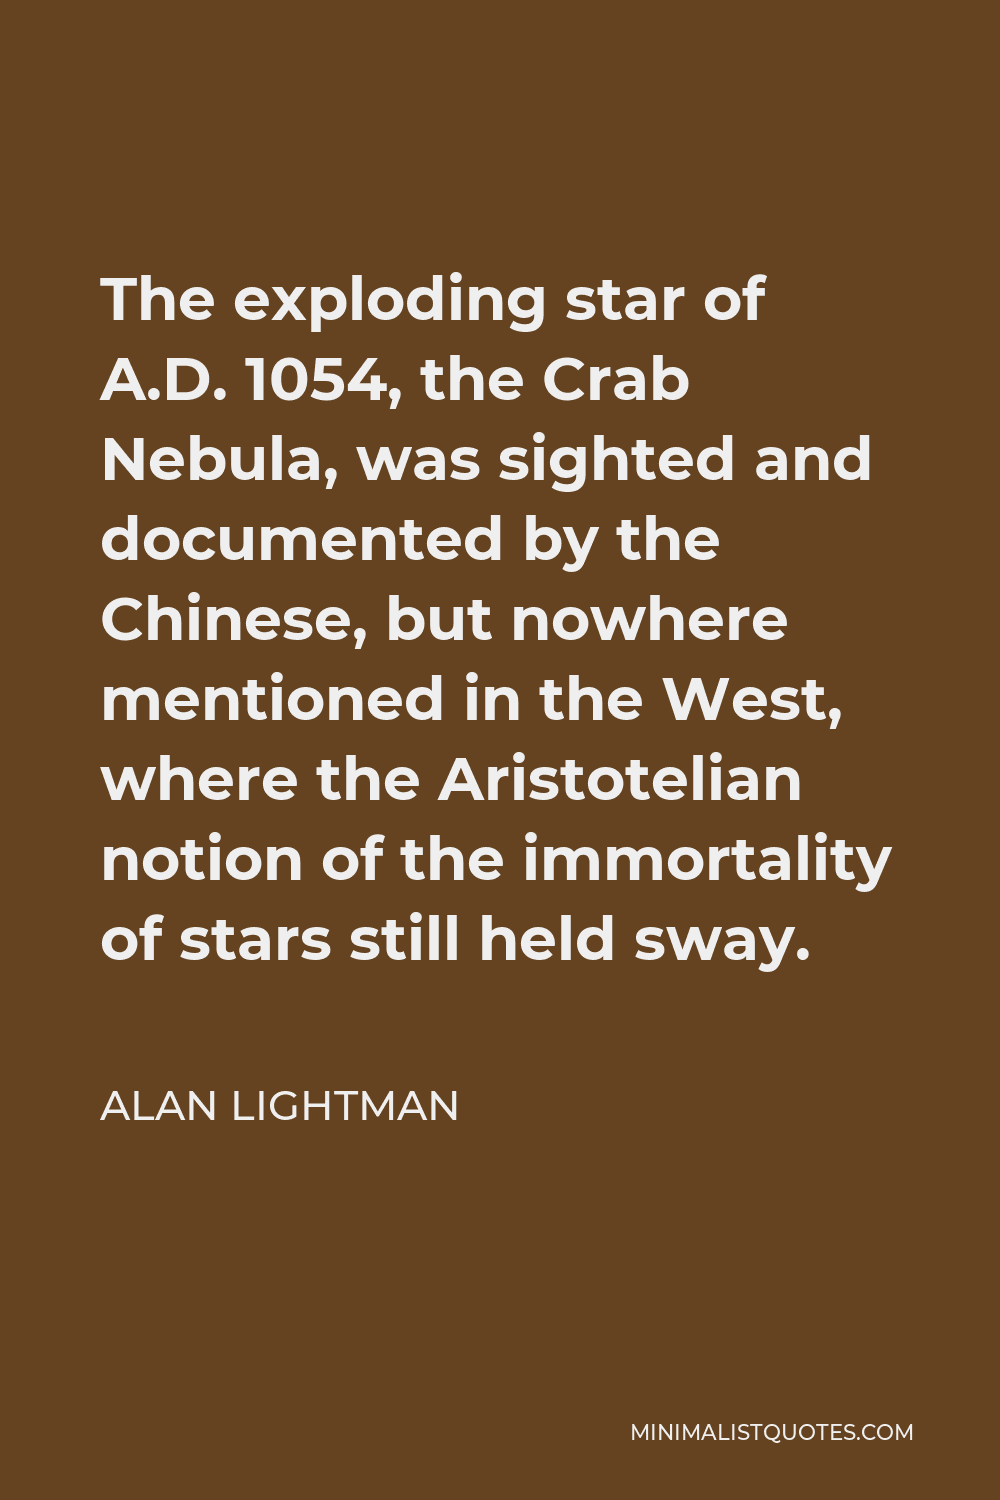 Alan Lightman Quote - The exploding star of A.D. 1054, the Crab Nebula, was sighted and documented by the Chinese, but nowhere mentioned in the West, where the Aristotelian notion of the immortality of stars still held sway.